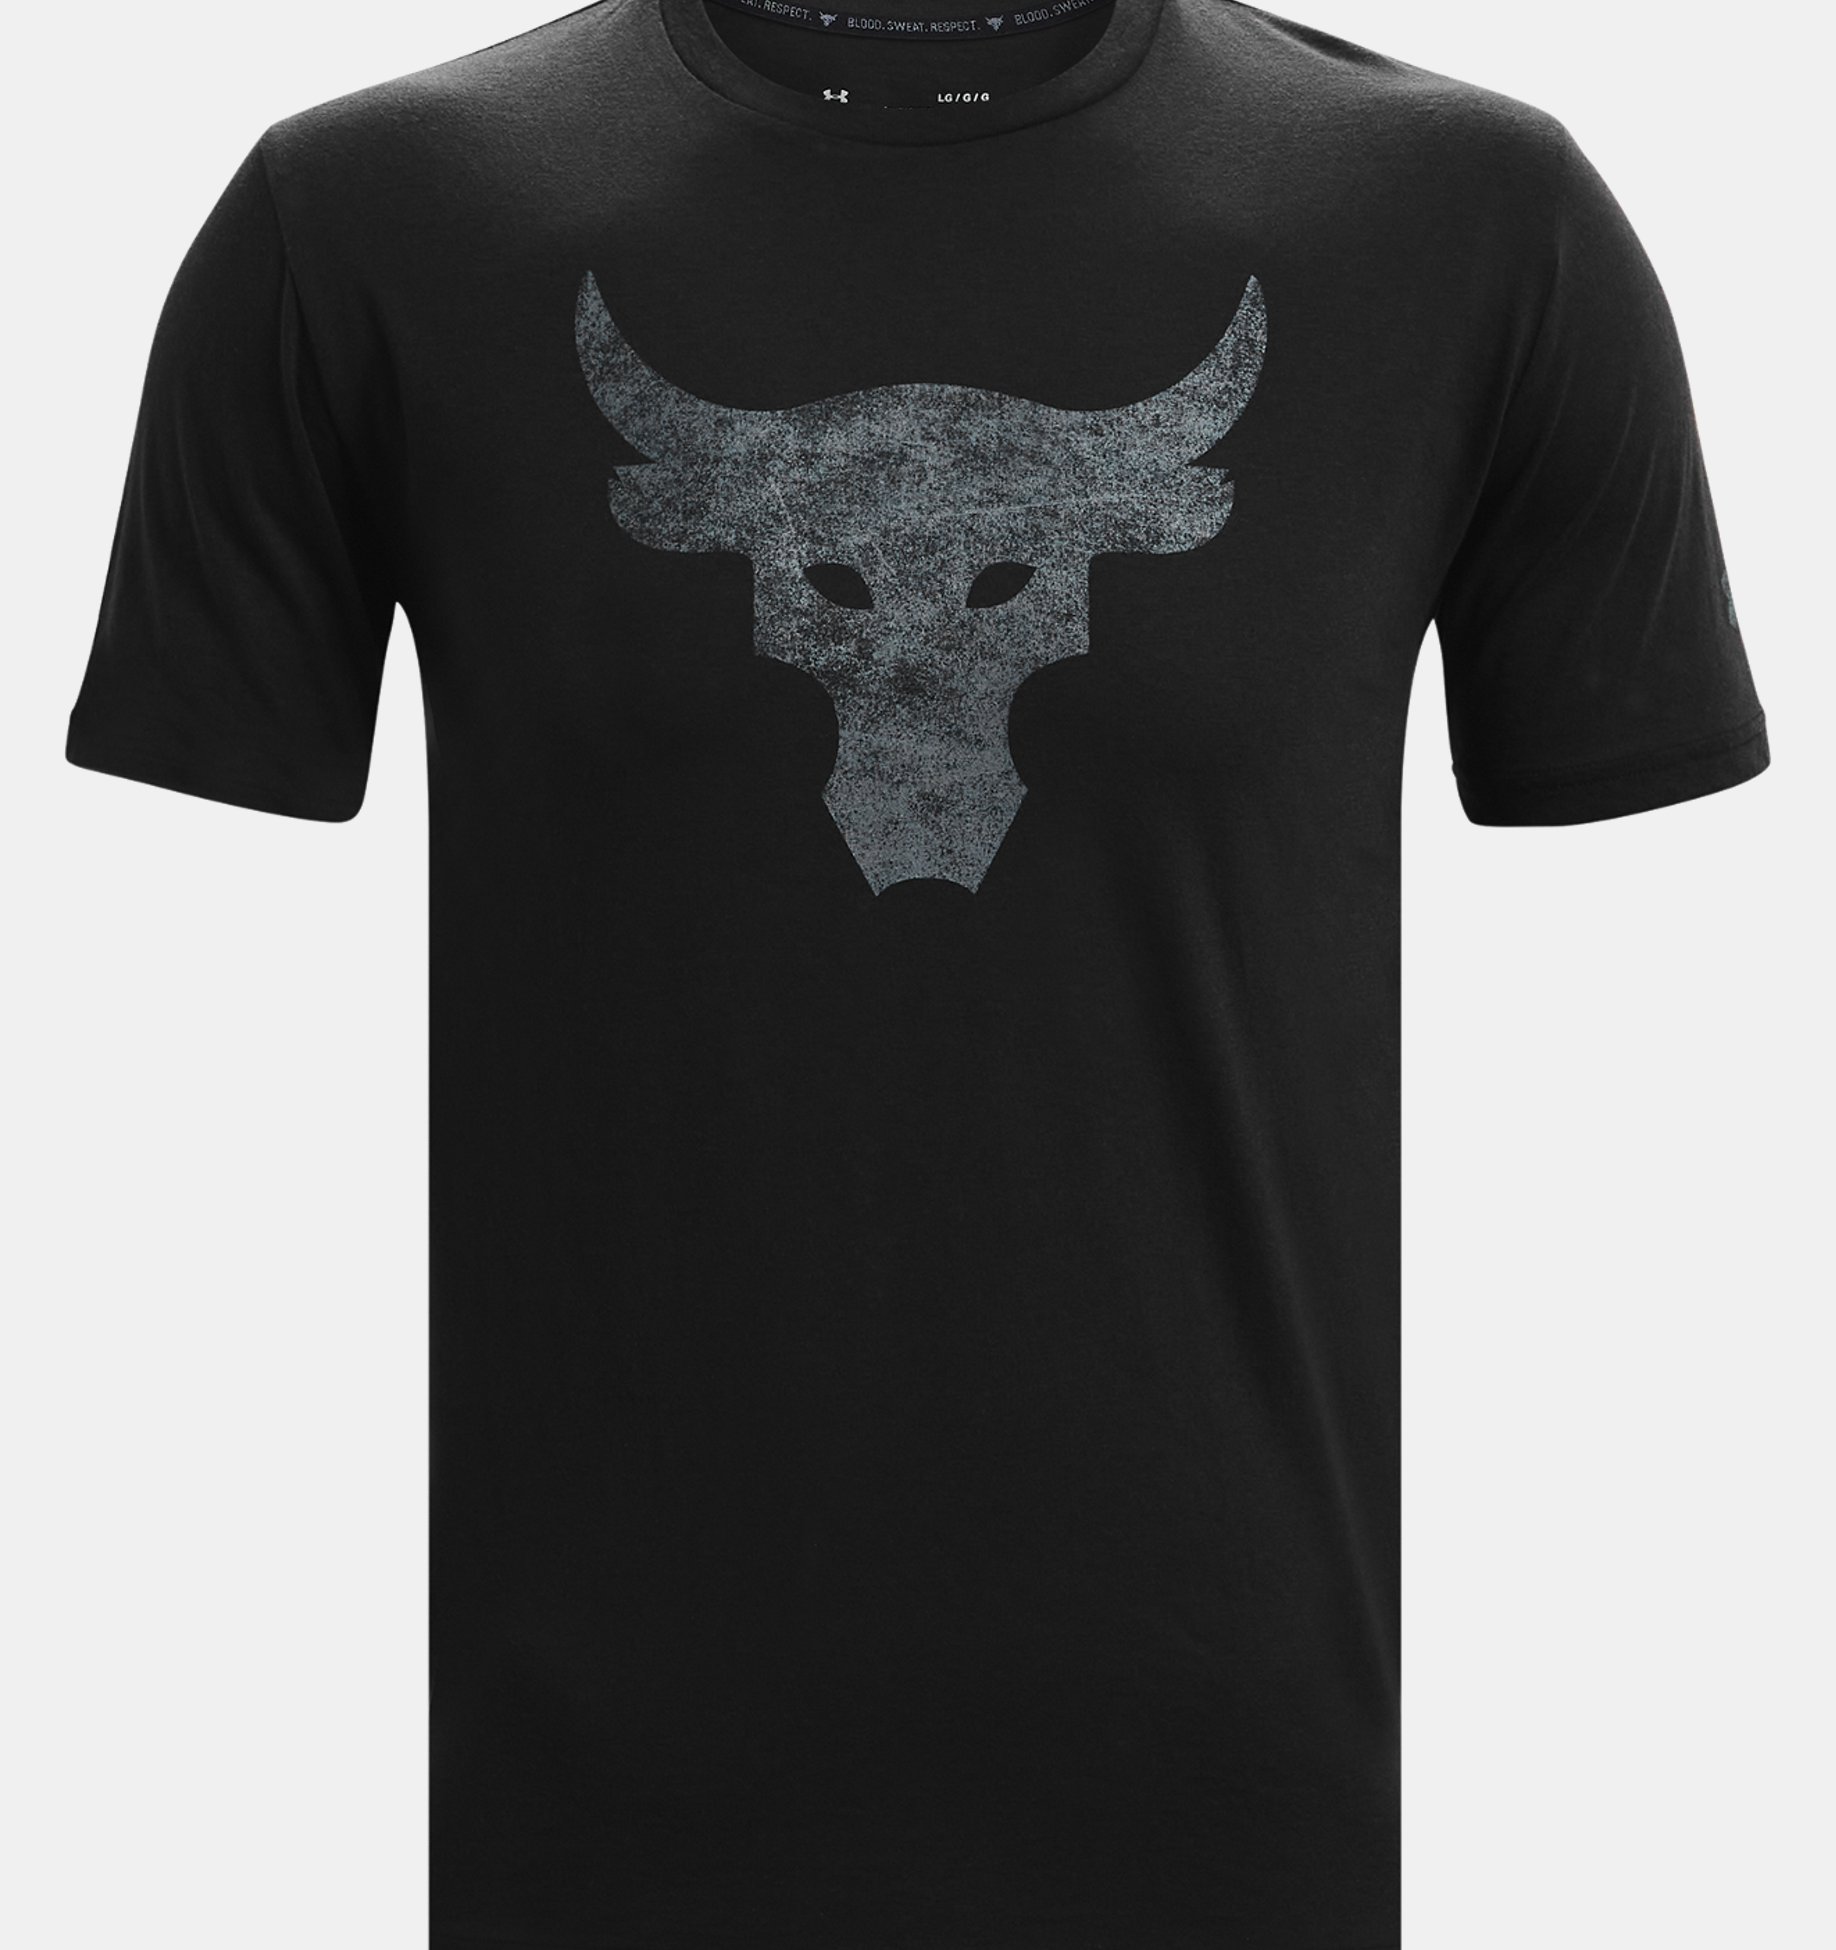 UNDER ARMOUR BLOOD SWEAT RESPECT UA PROJECT ROCK BRAHAM BULL ON SLEEVE T-SHIRT 